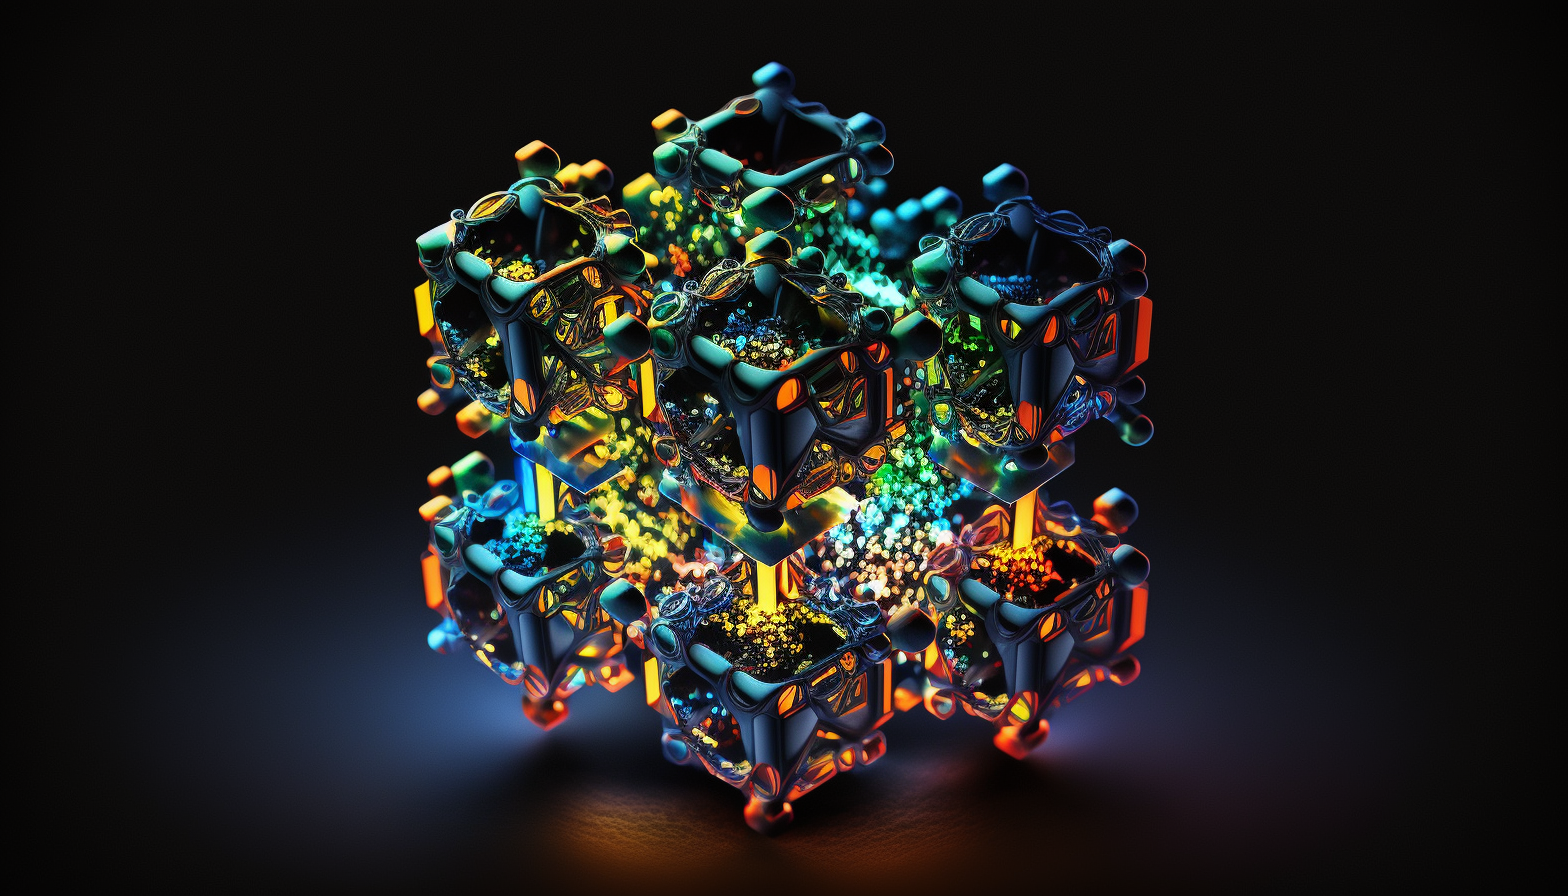 A carbon crystal structure glowing with brilliant colors against a dark background.